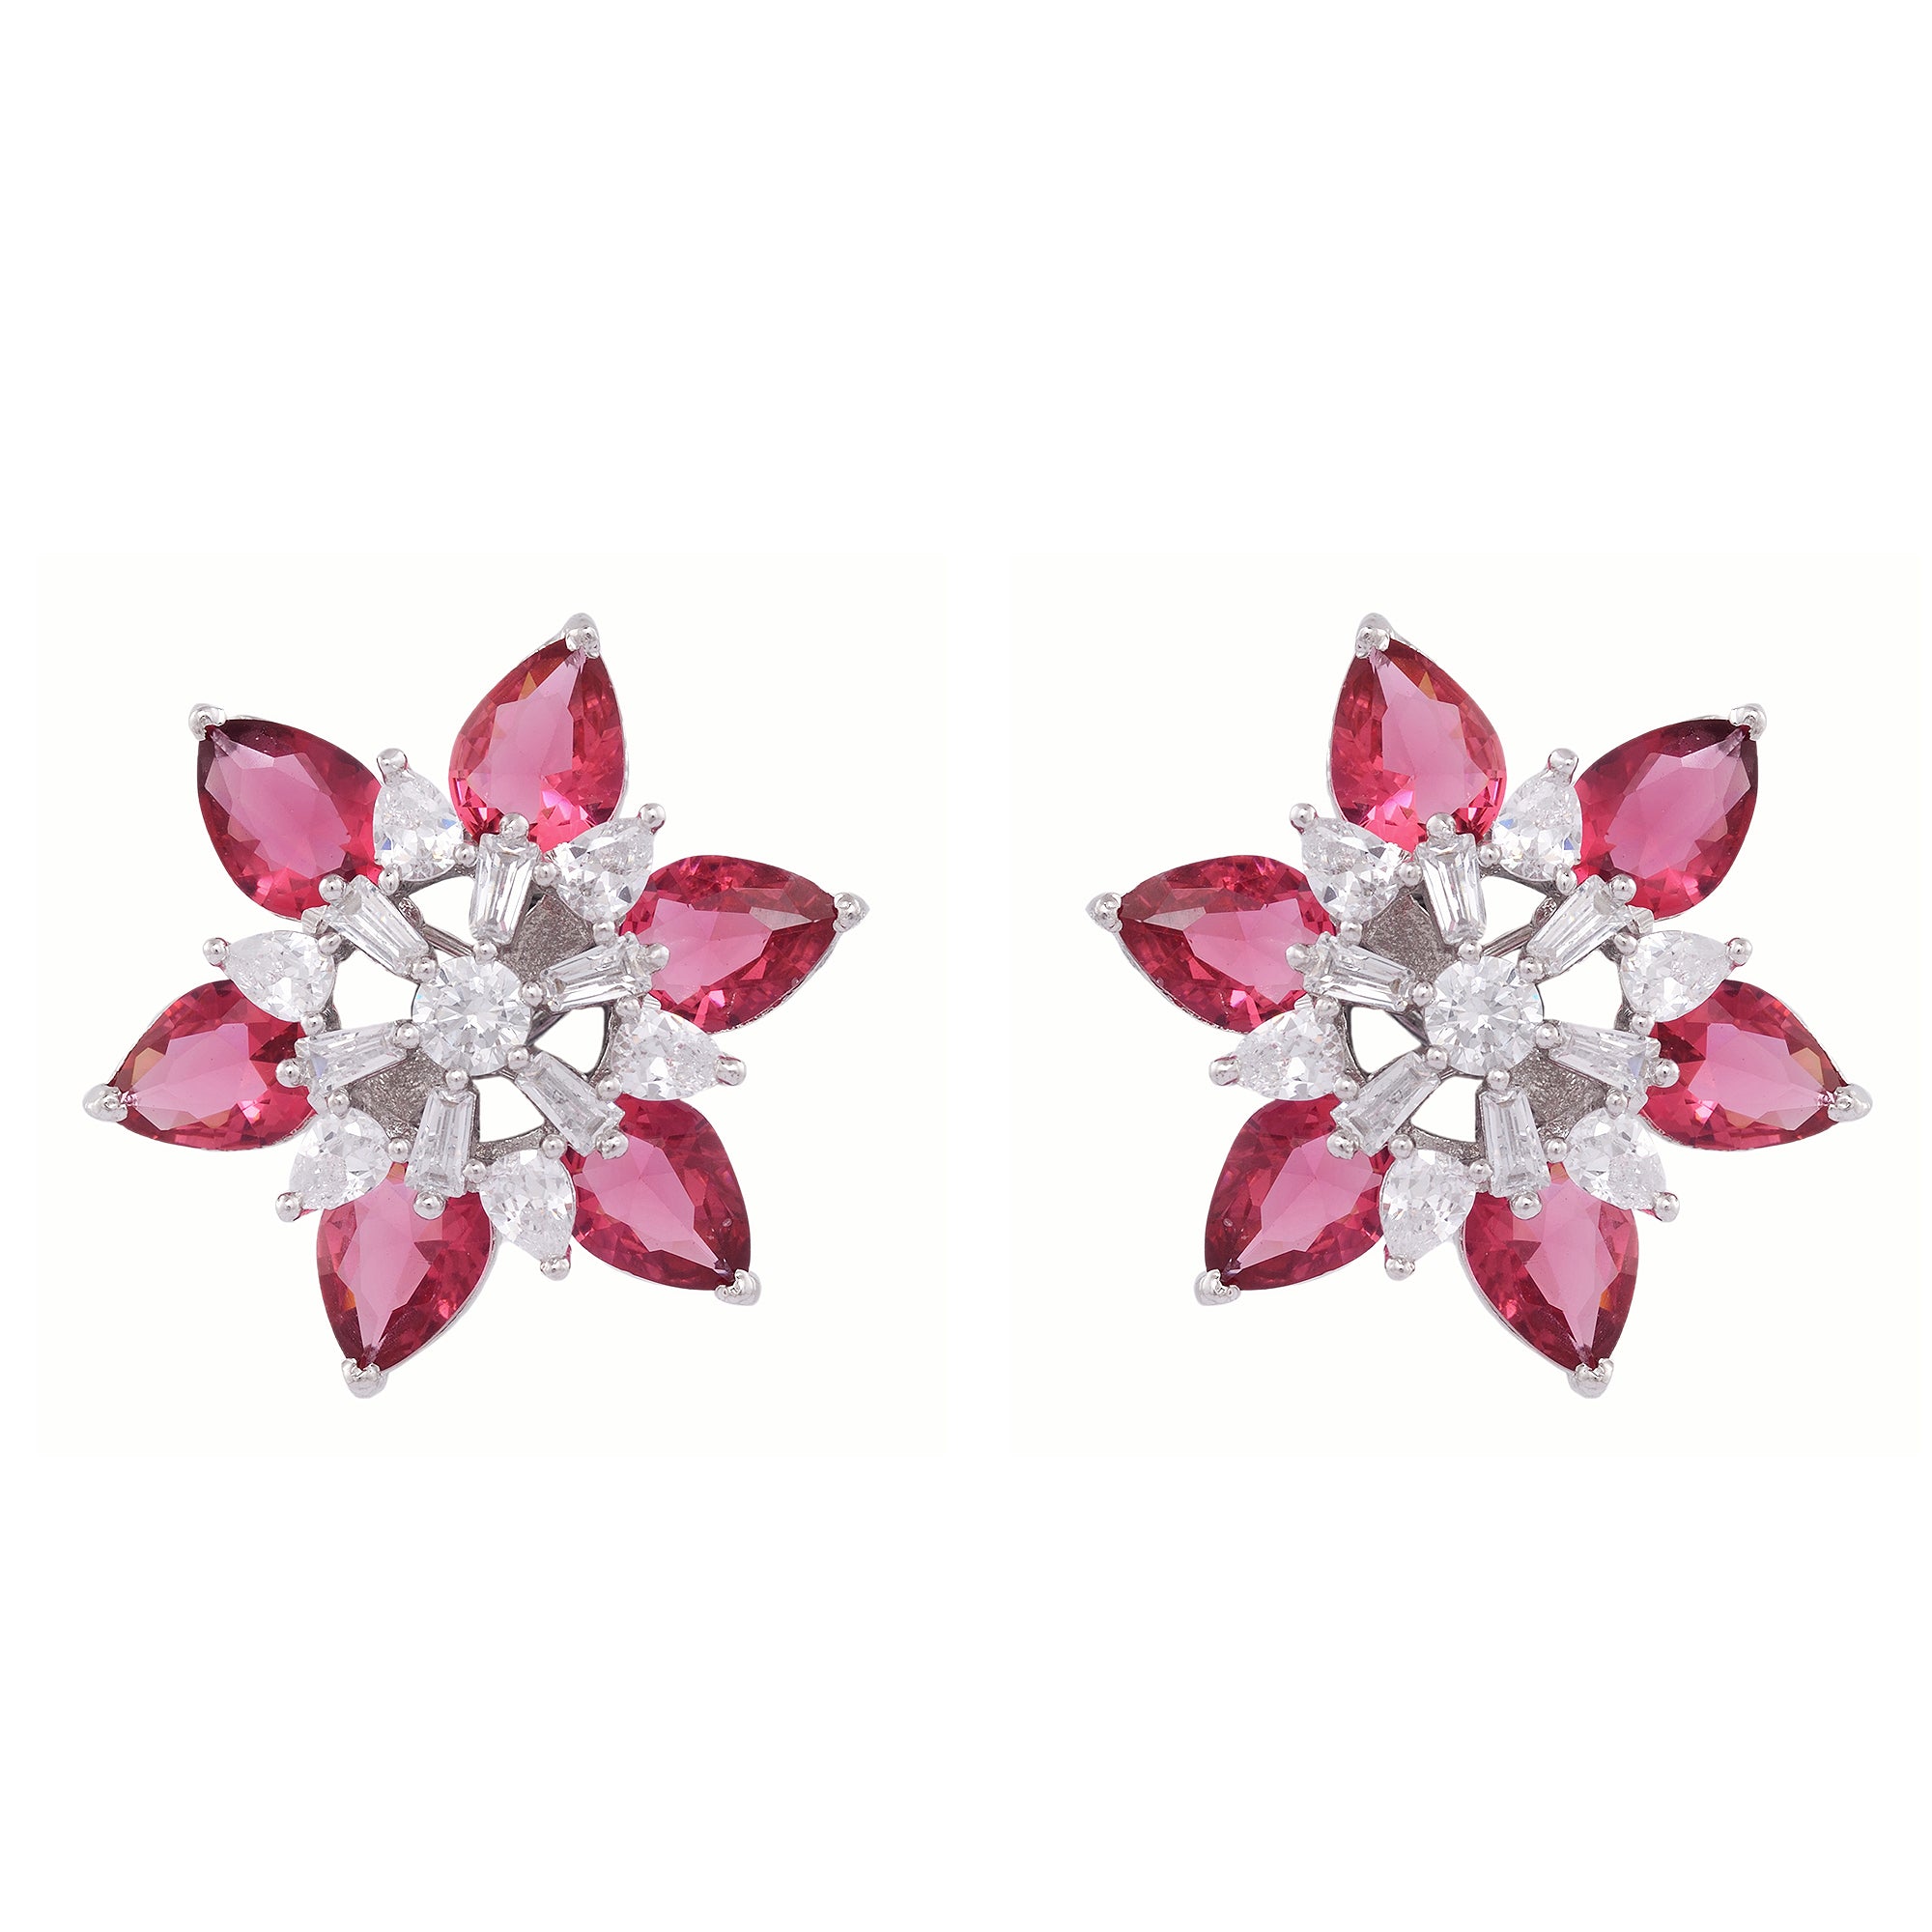 White Rhodium With Ruby American Diamond Studded Handcrafted Earrings for Women and Girls - Saraf RS Jewellery